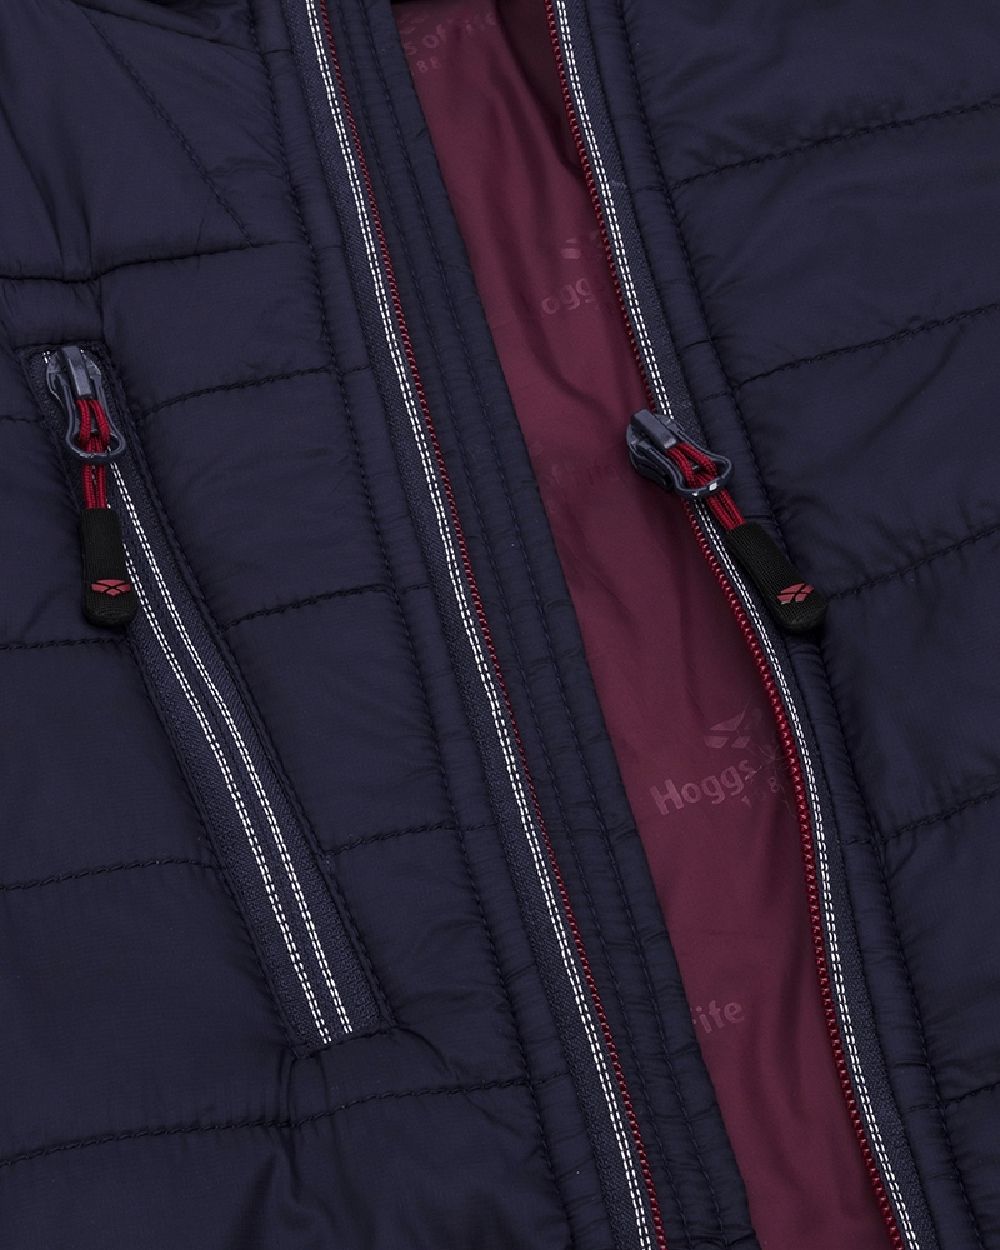 Navy/Merlot coloured Hoggs of Fife Kingston Lightweight Quilted Jacket on white background 